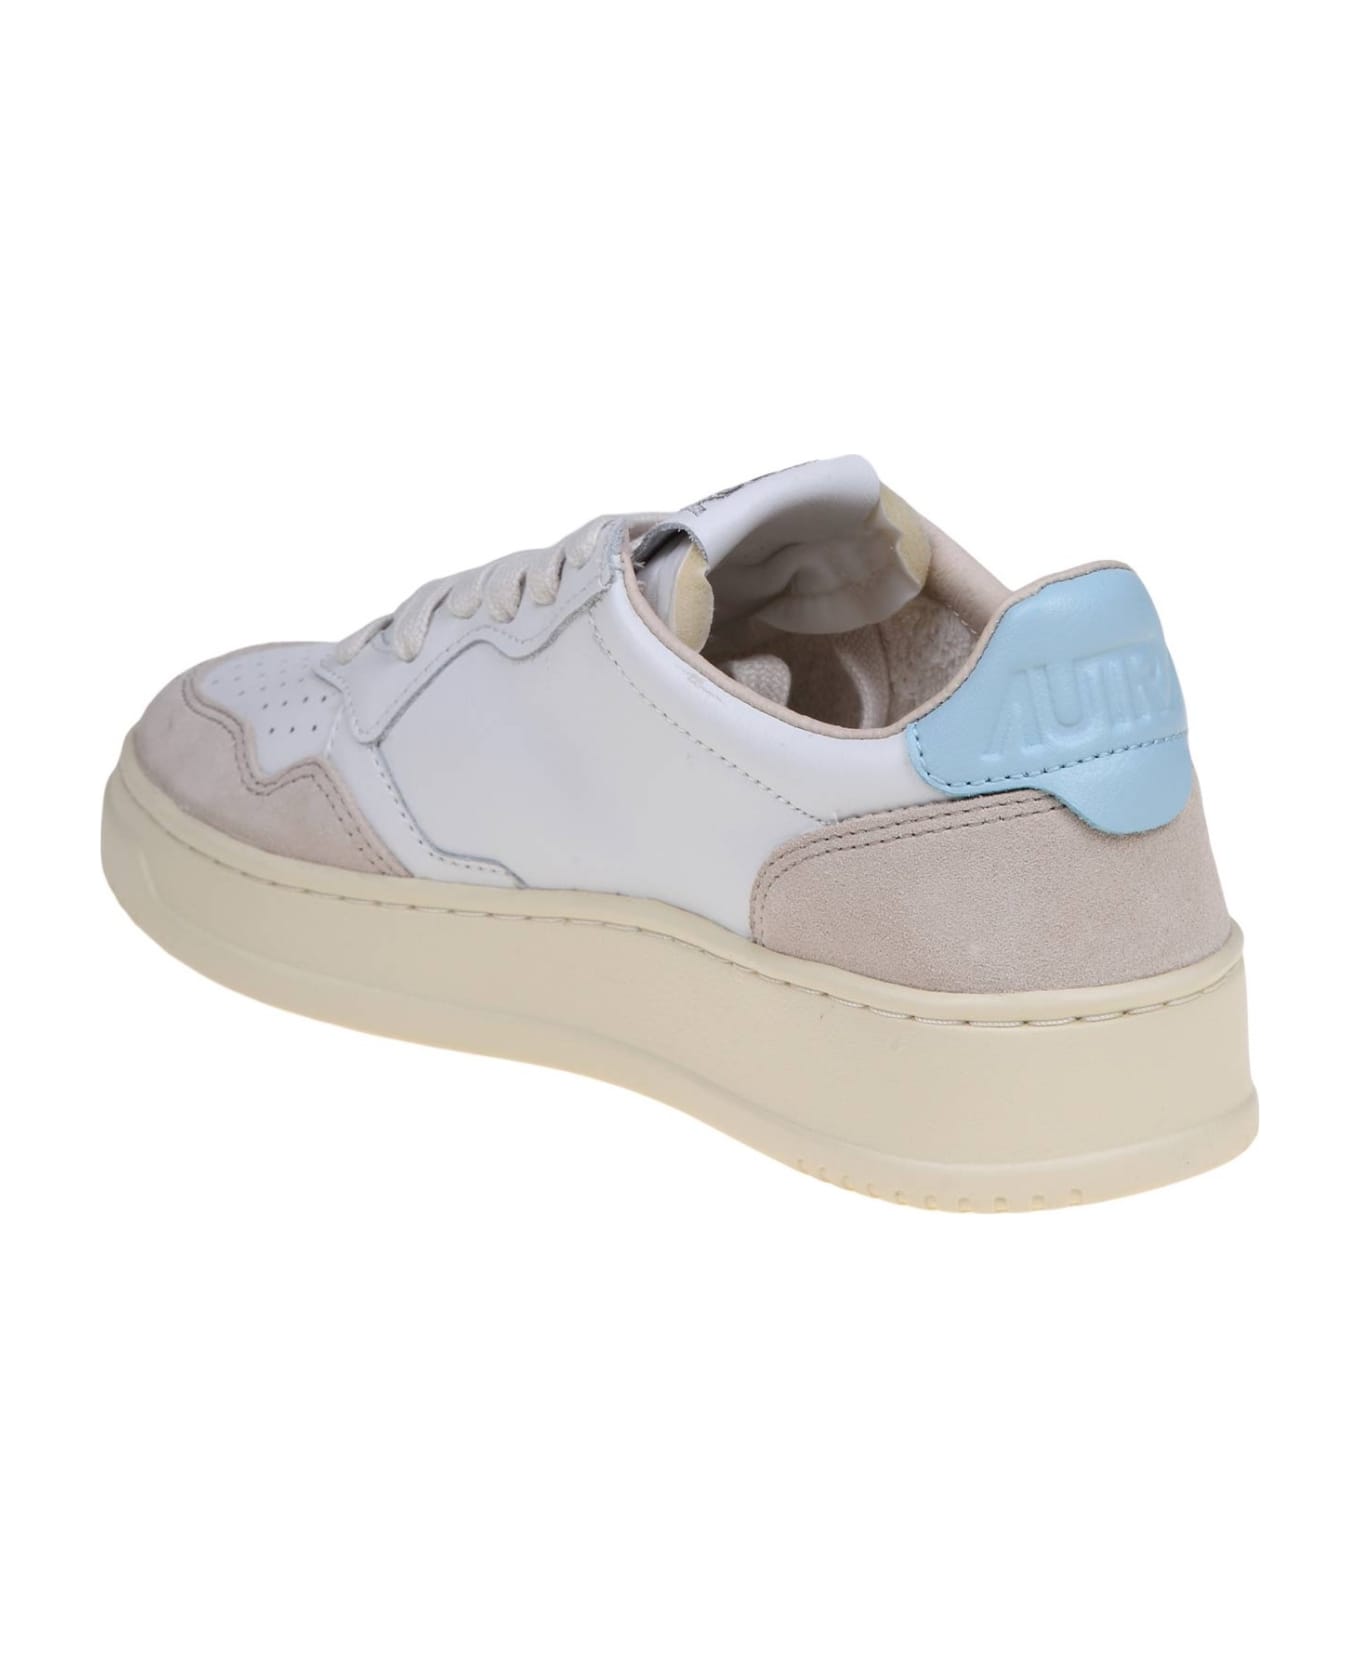 Autry Medalist Low Sneakers - white/blue